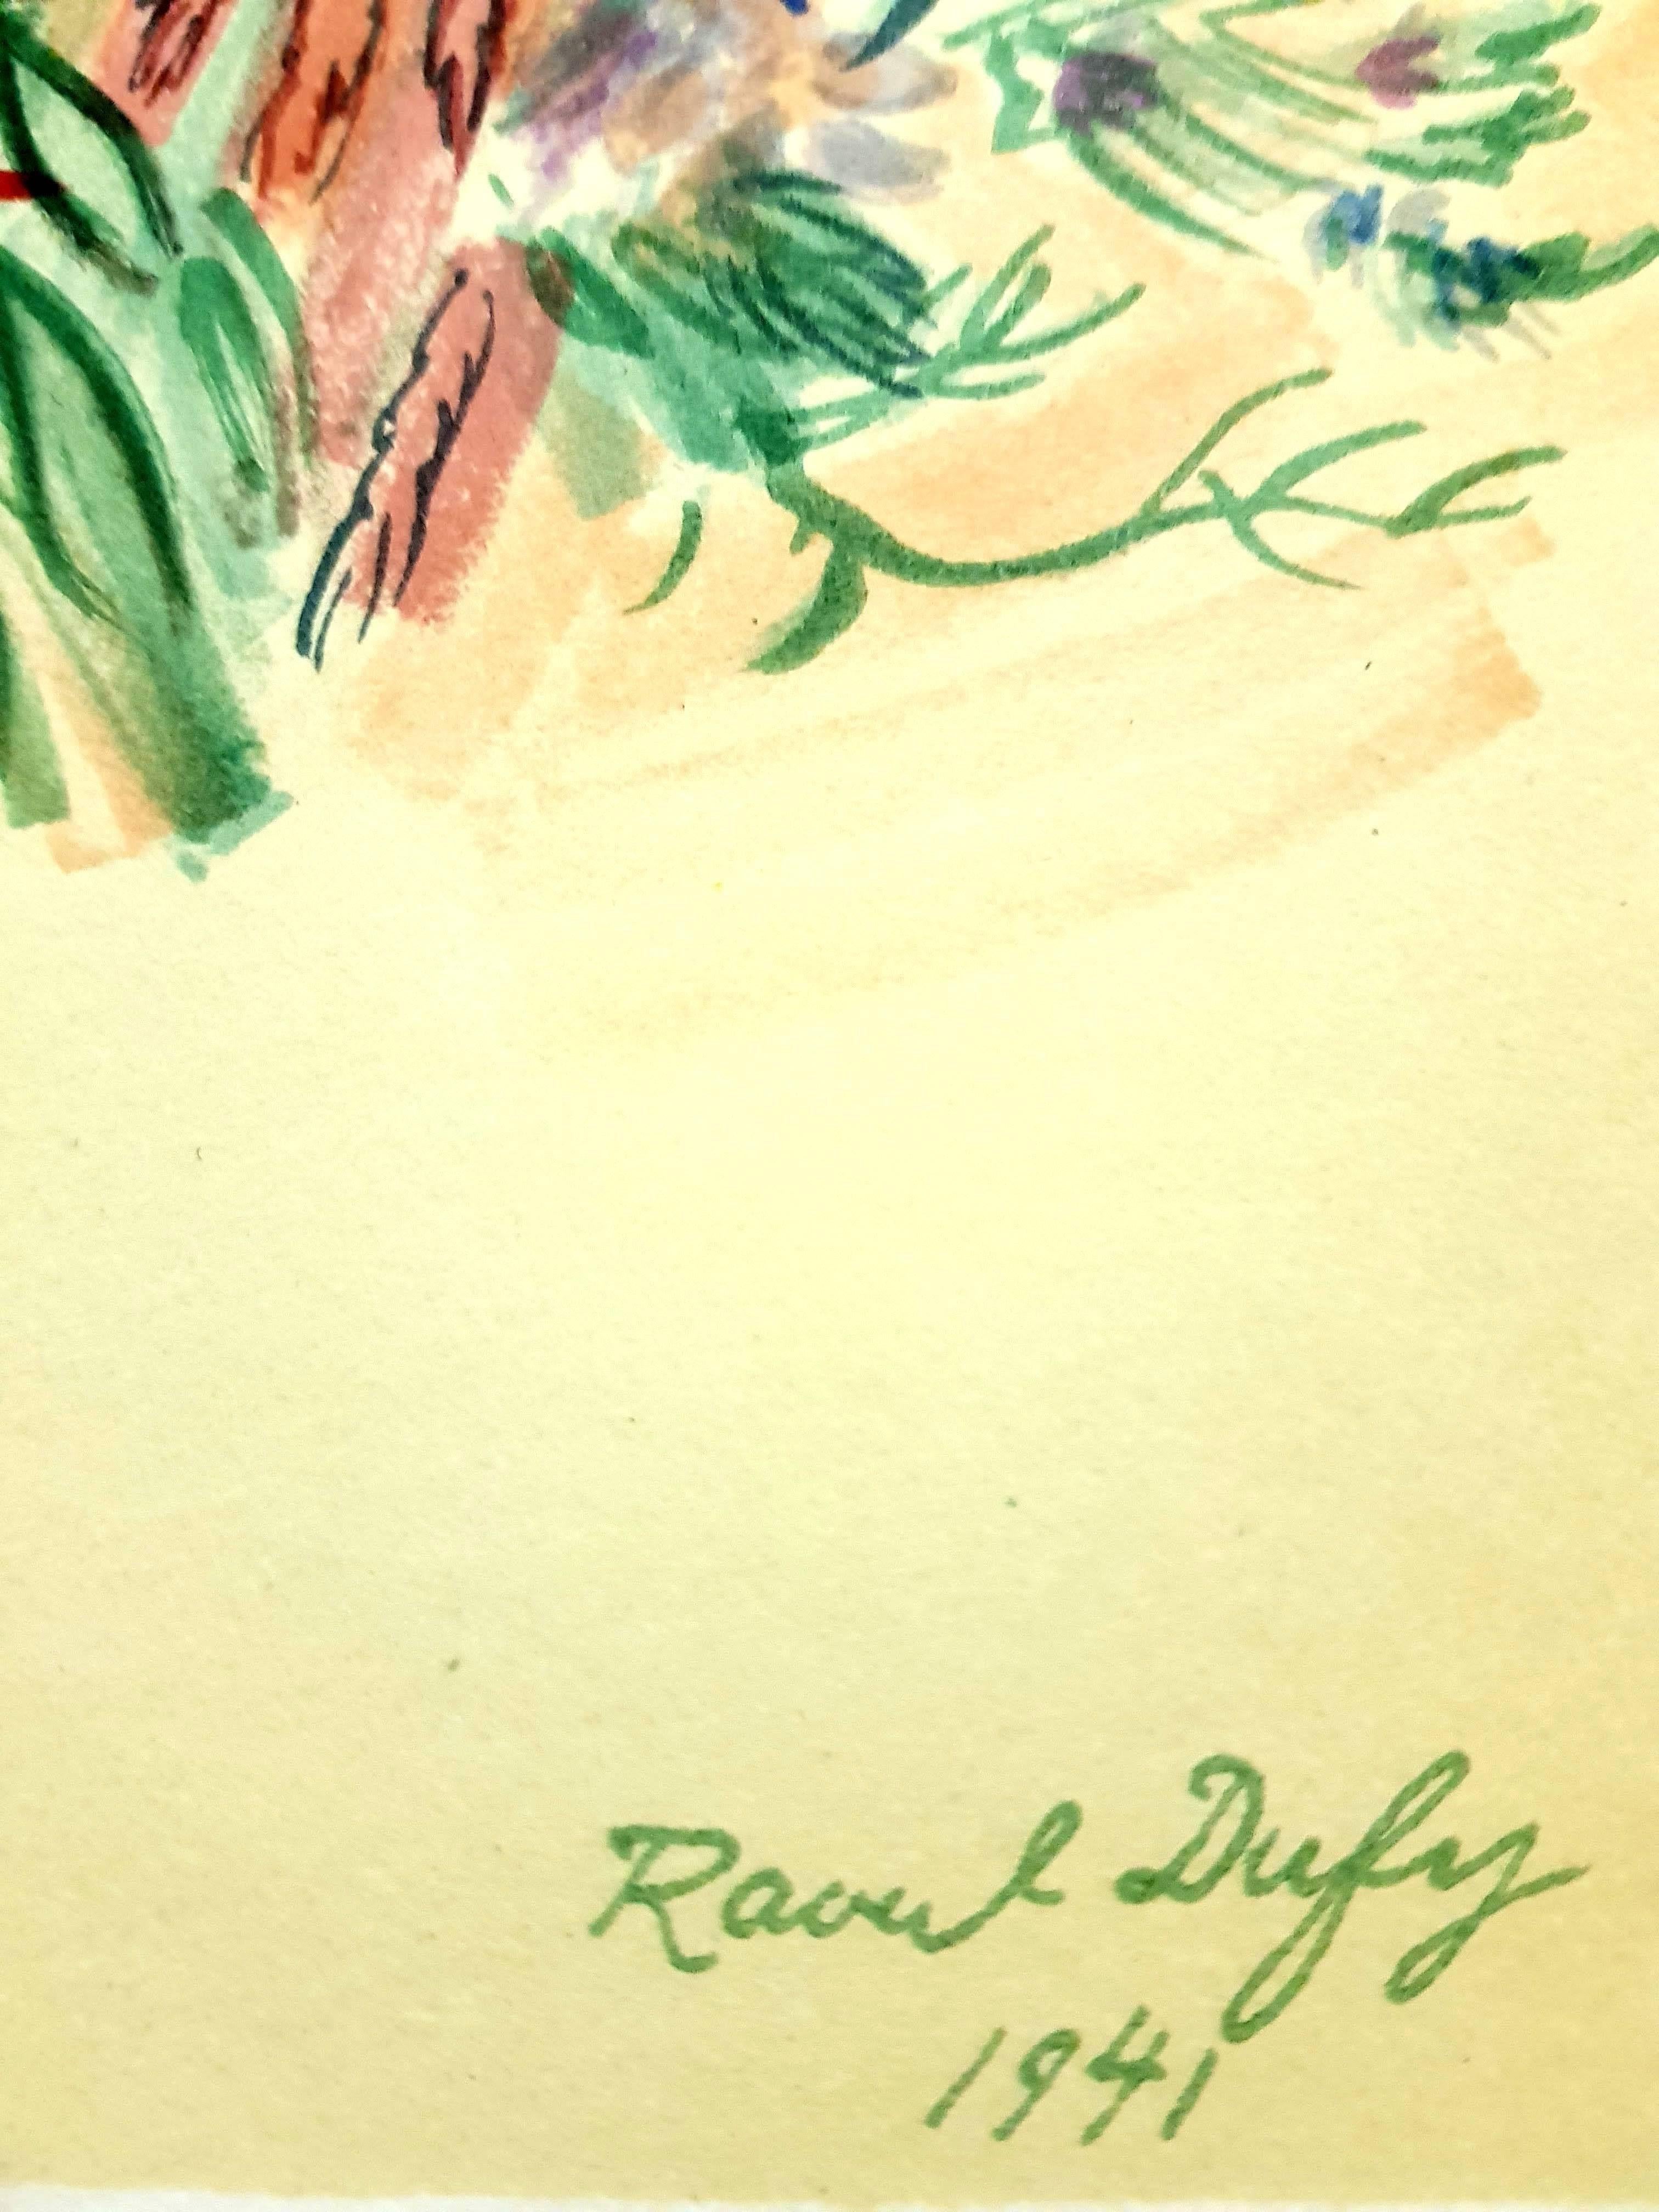 Flowers - Lithograph - Print by (after) Raoul Dufy